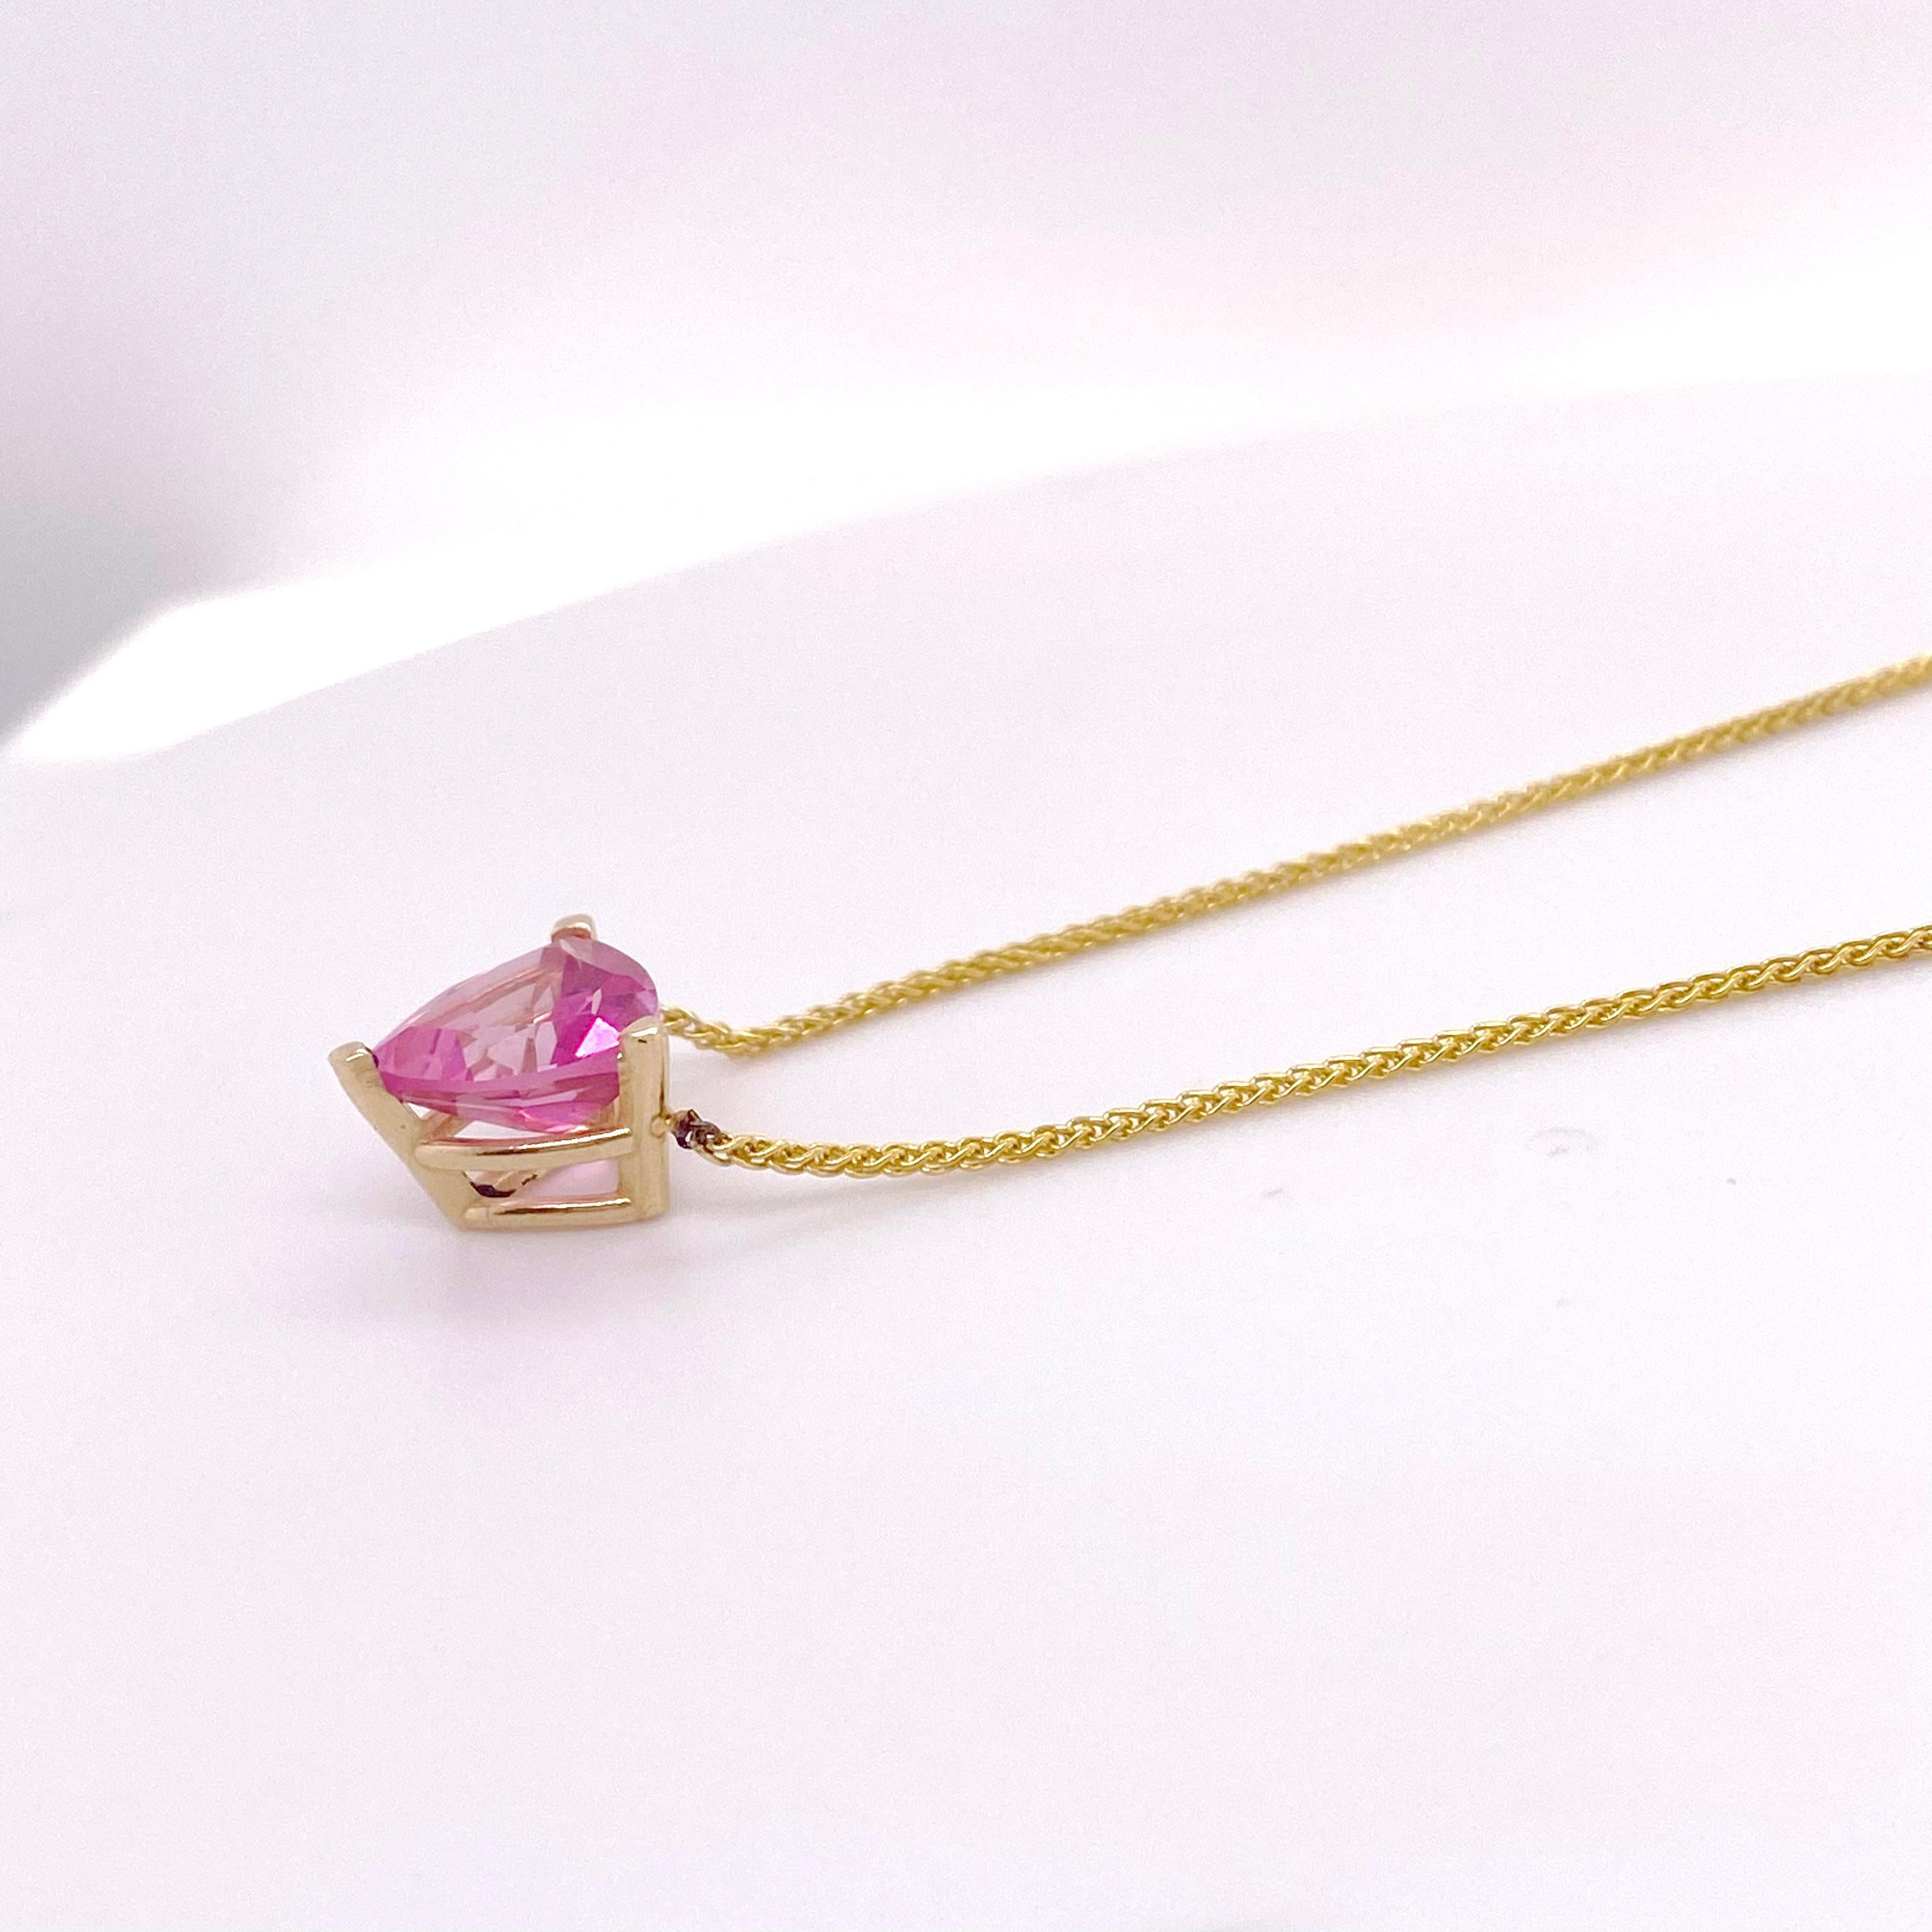 Pink, bright pink, topaz that is a massive 5.50 carat, trillion shape. This fabulous specimen of pink topaz is a very pure color. It is set in a three prong basket with a wheat chain.  This necklace will look amazing on you or your loved one! The